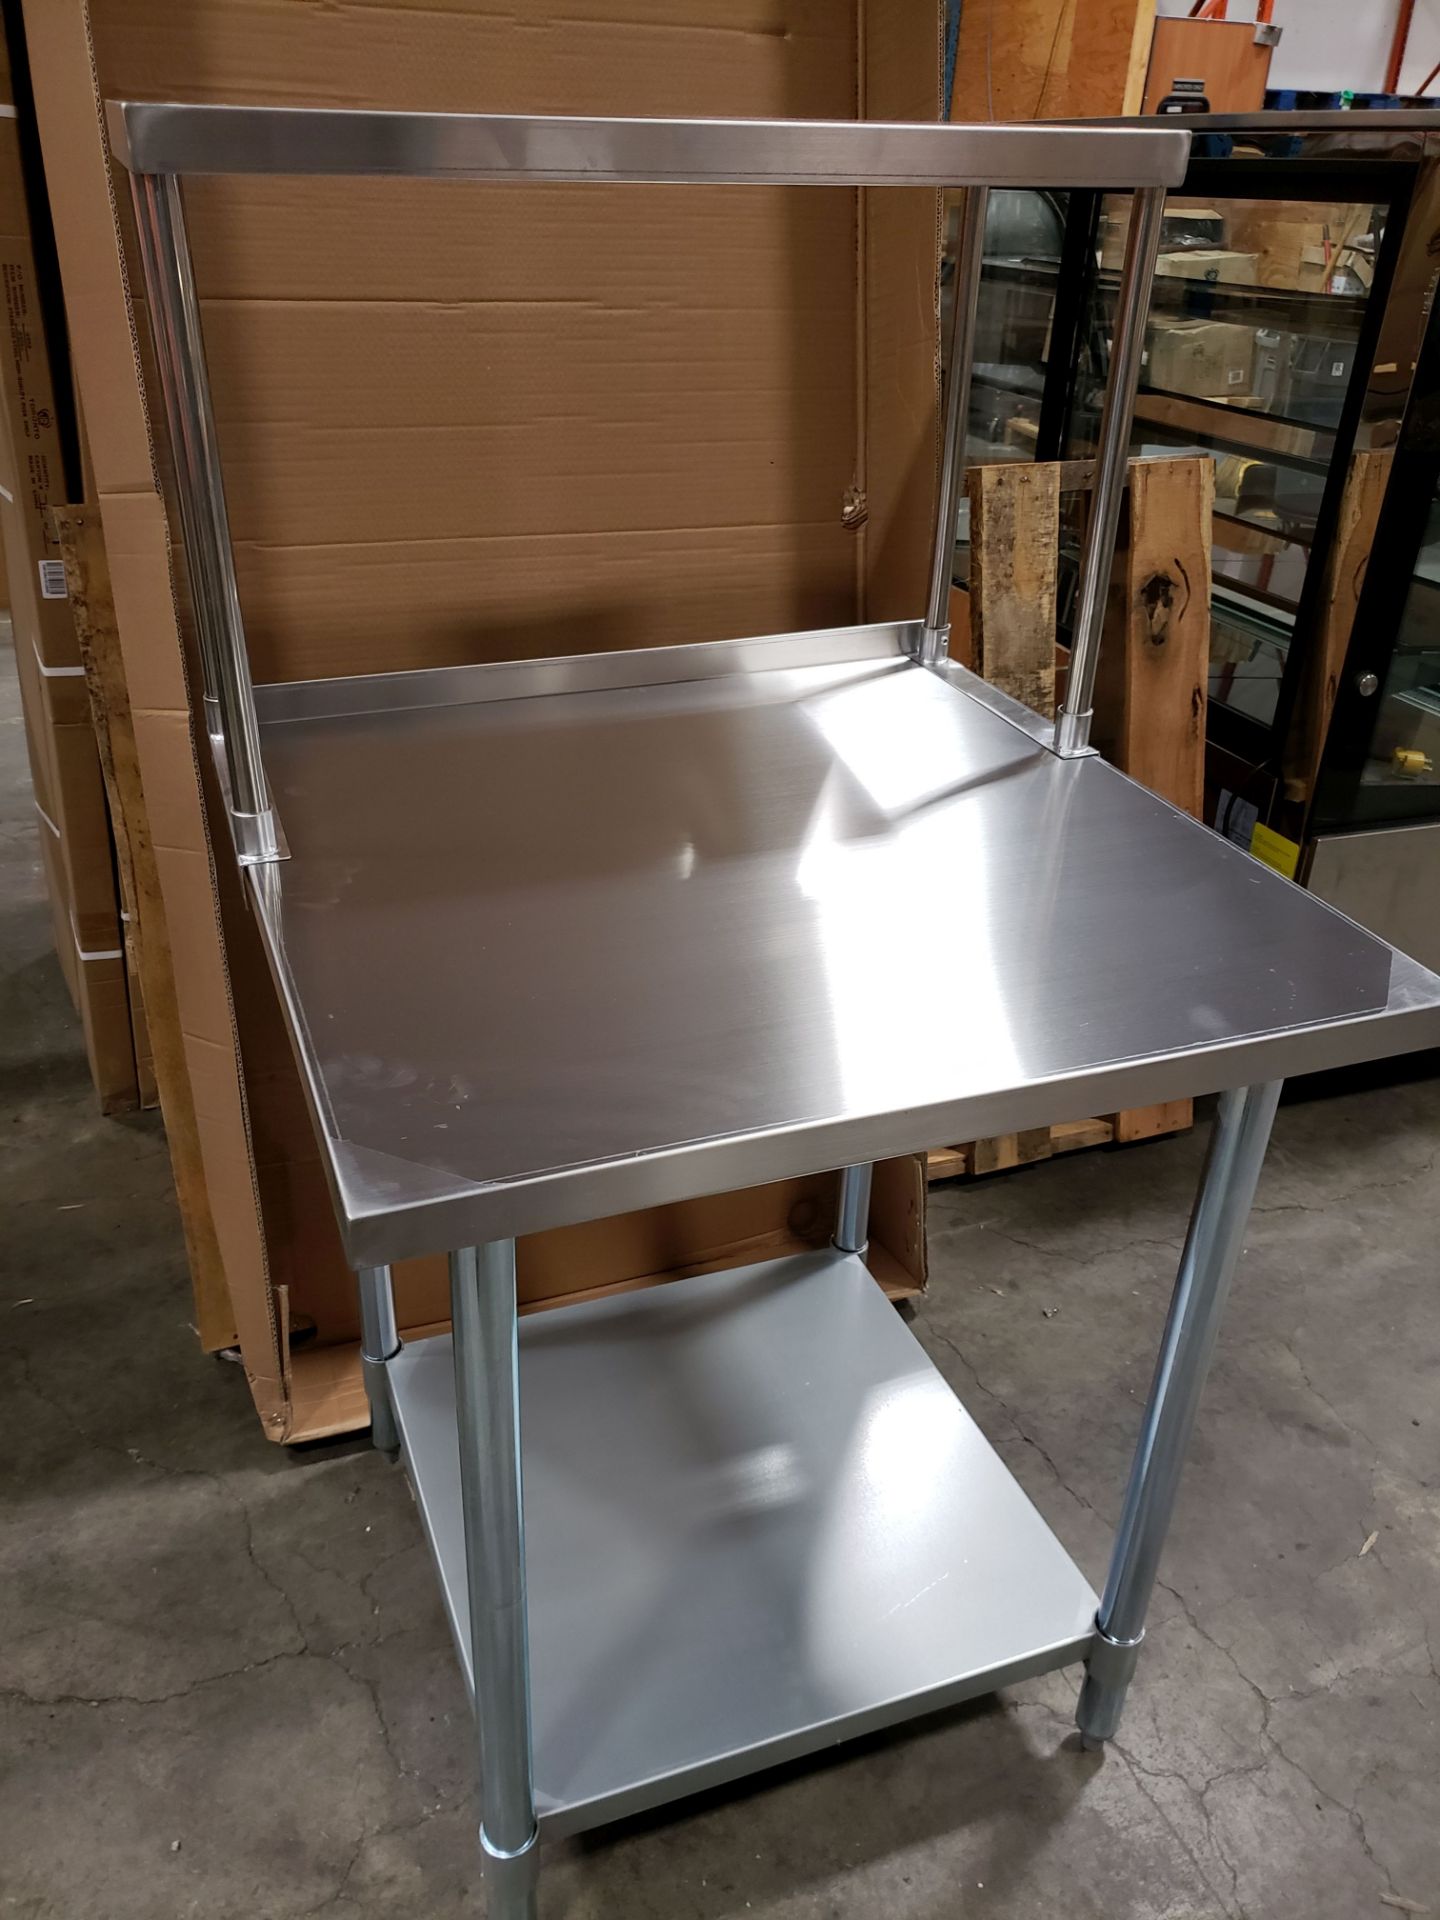 30" x 30" Stainless Table with 1.5" Backsplash and 12" x 30" Overshelf - Image 2 of 3